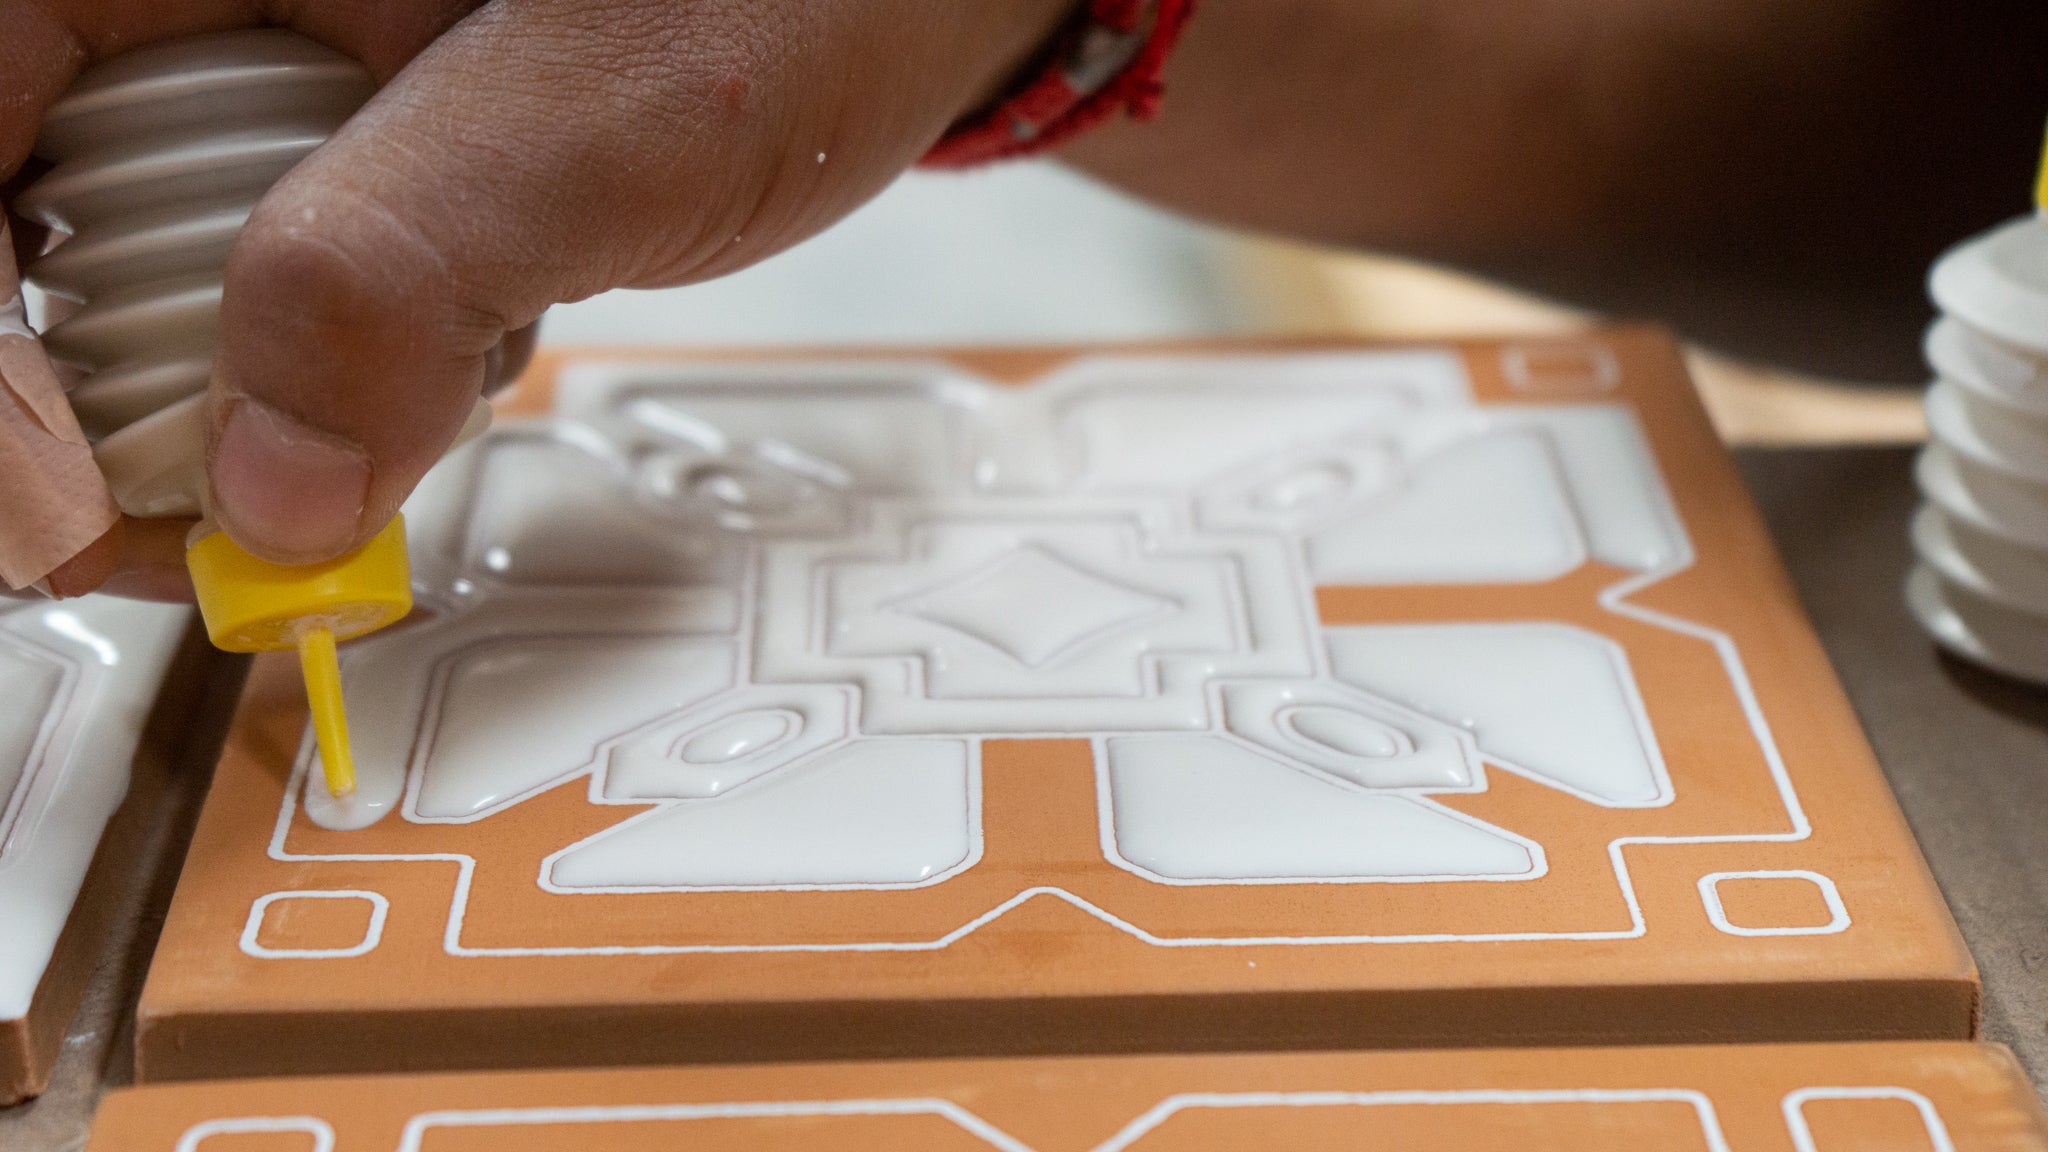 Relief tile being painted with white paint by hand clay imports